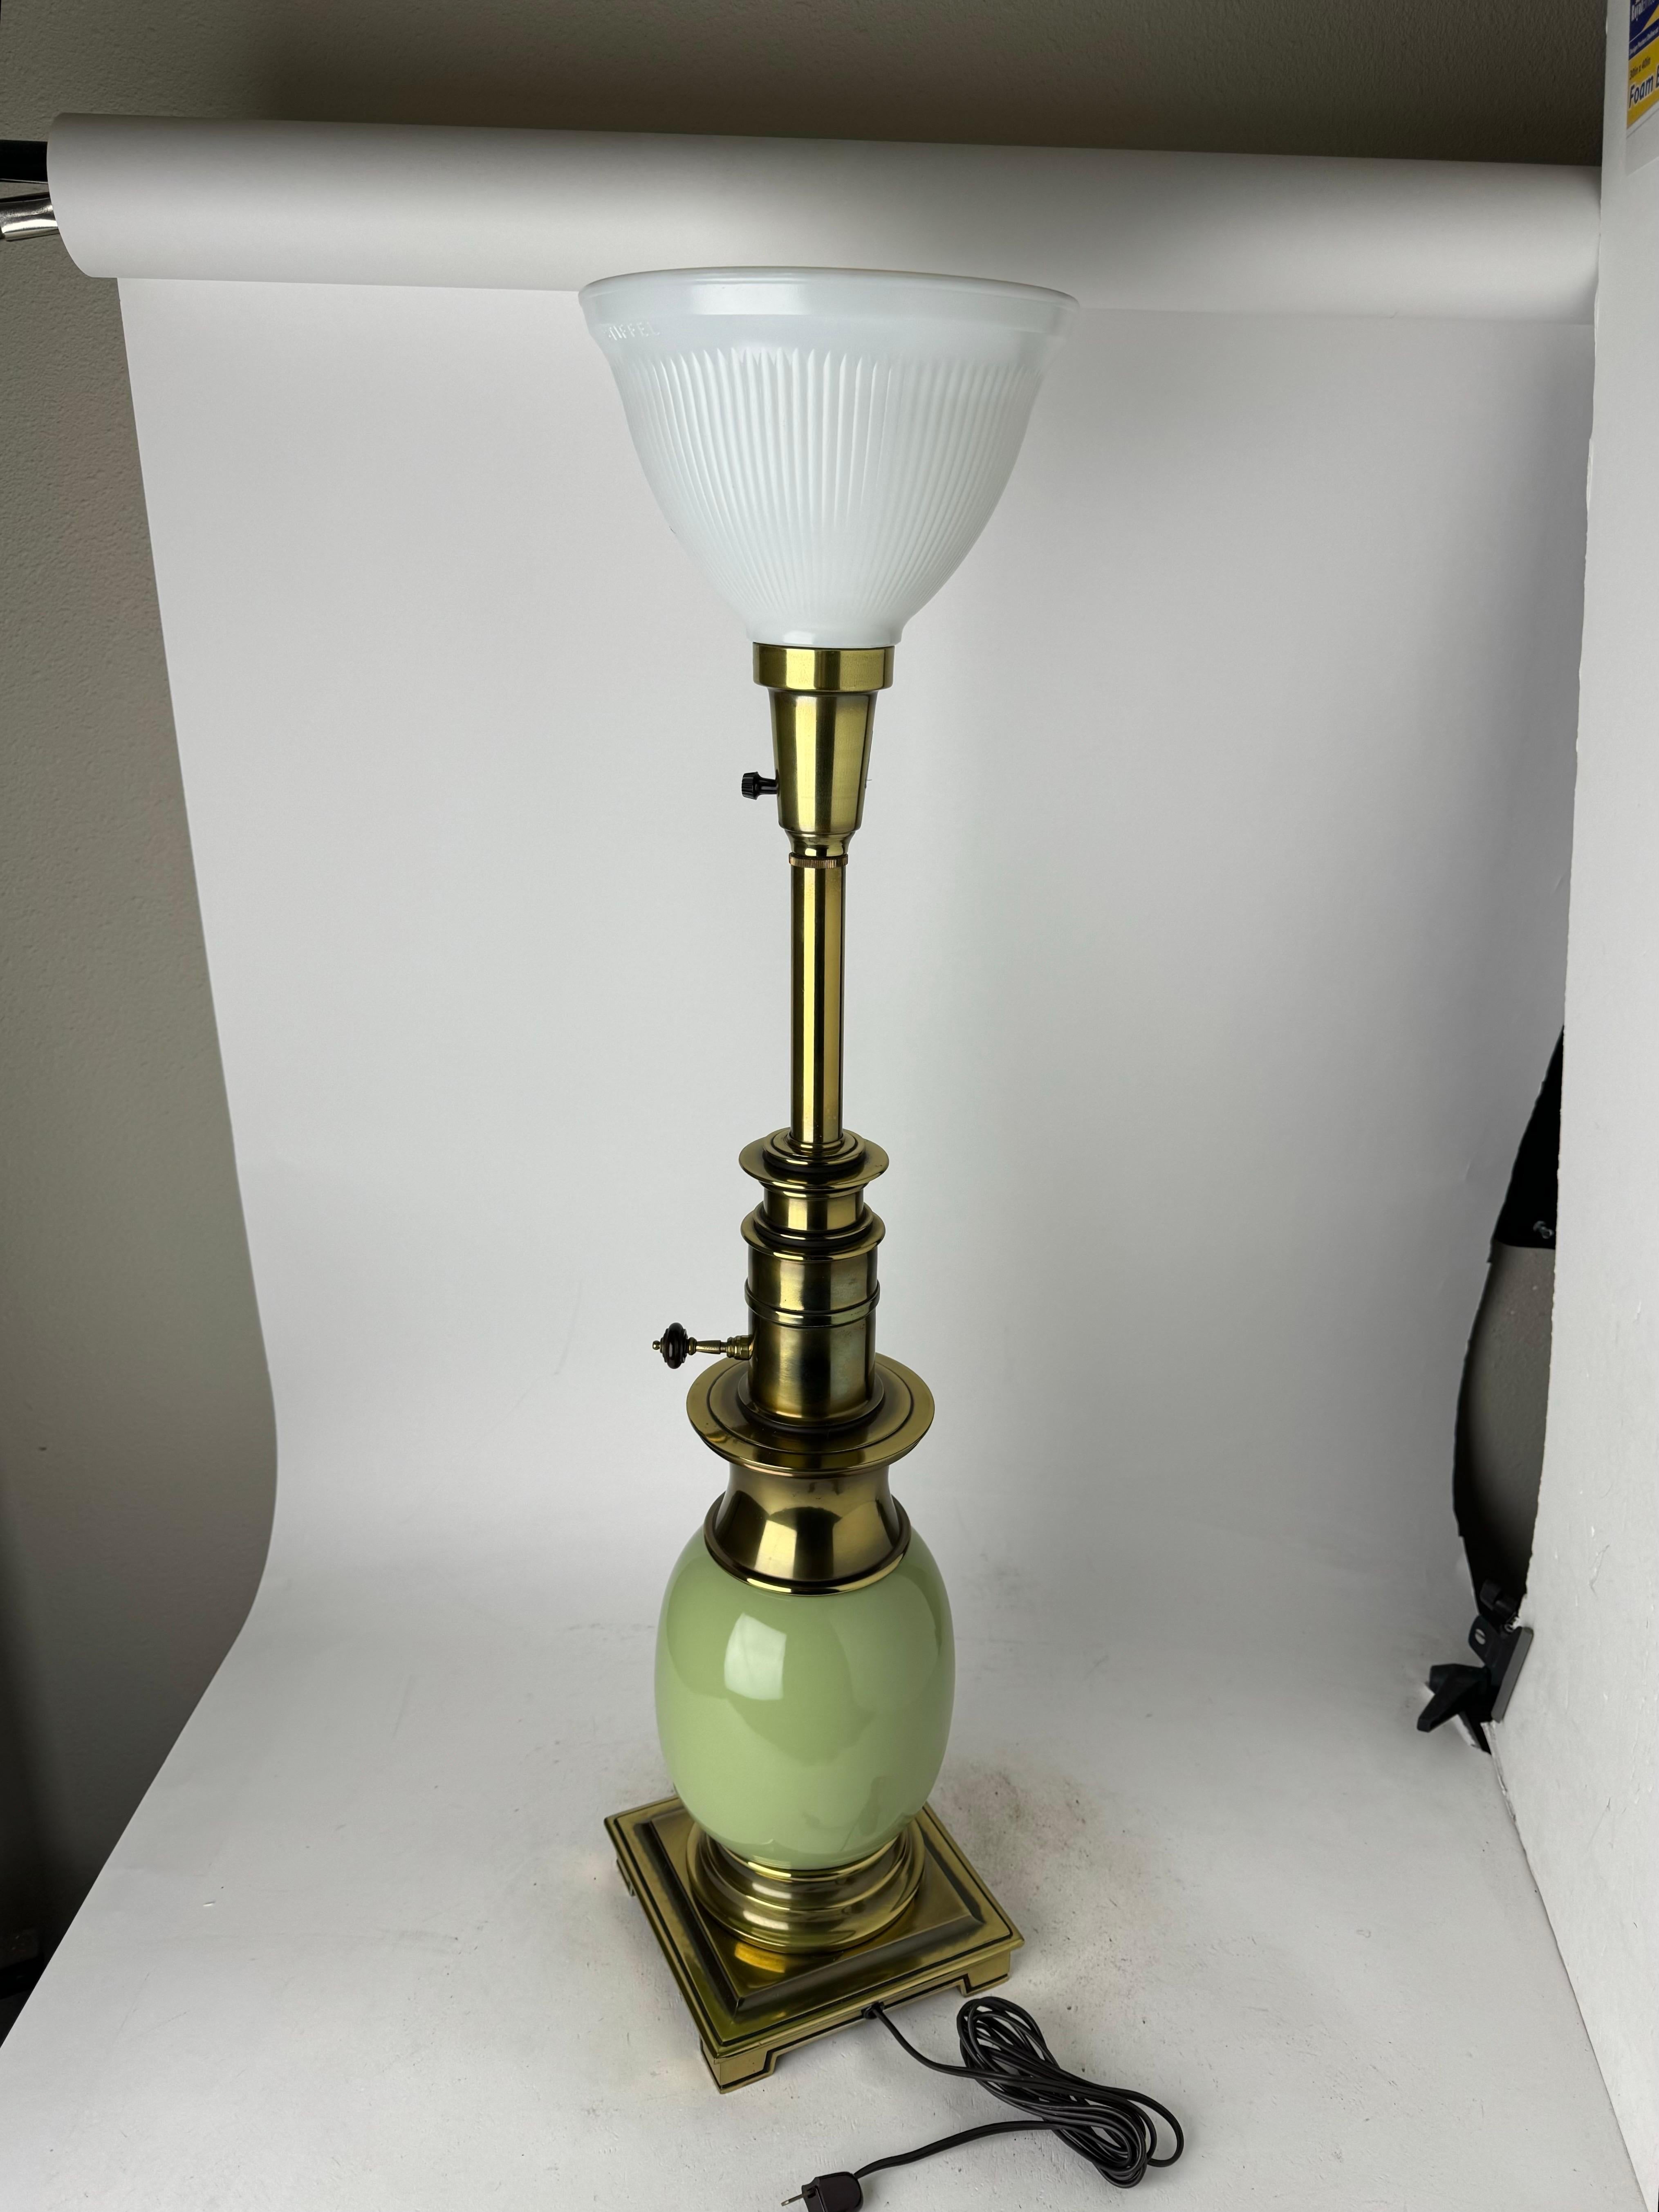 🌟 Stunning Hollywood Regency Style Torchiere by Stiffel 🌟

Elevate your home decor with this exquisite Hollywood Regency style Torchiere, crafted by the renowned Stiffel brand. This lamp is a perfect blend of elegance and sophistication, sure to